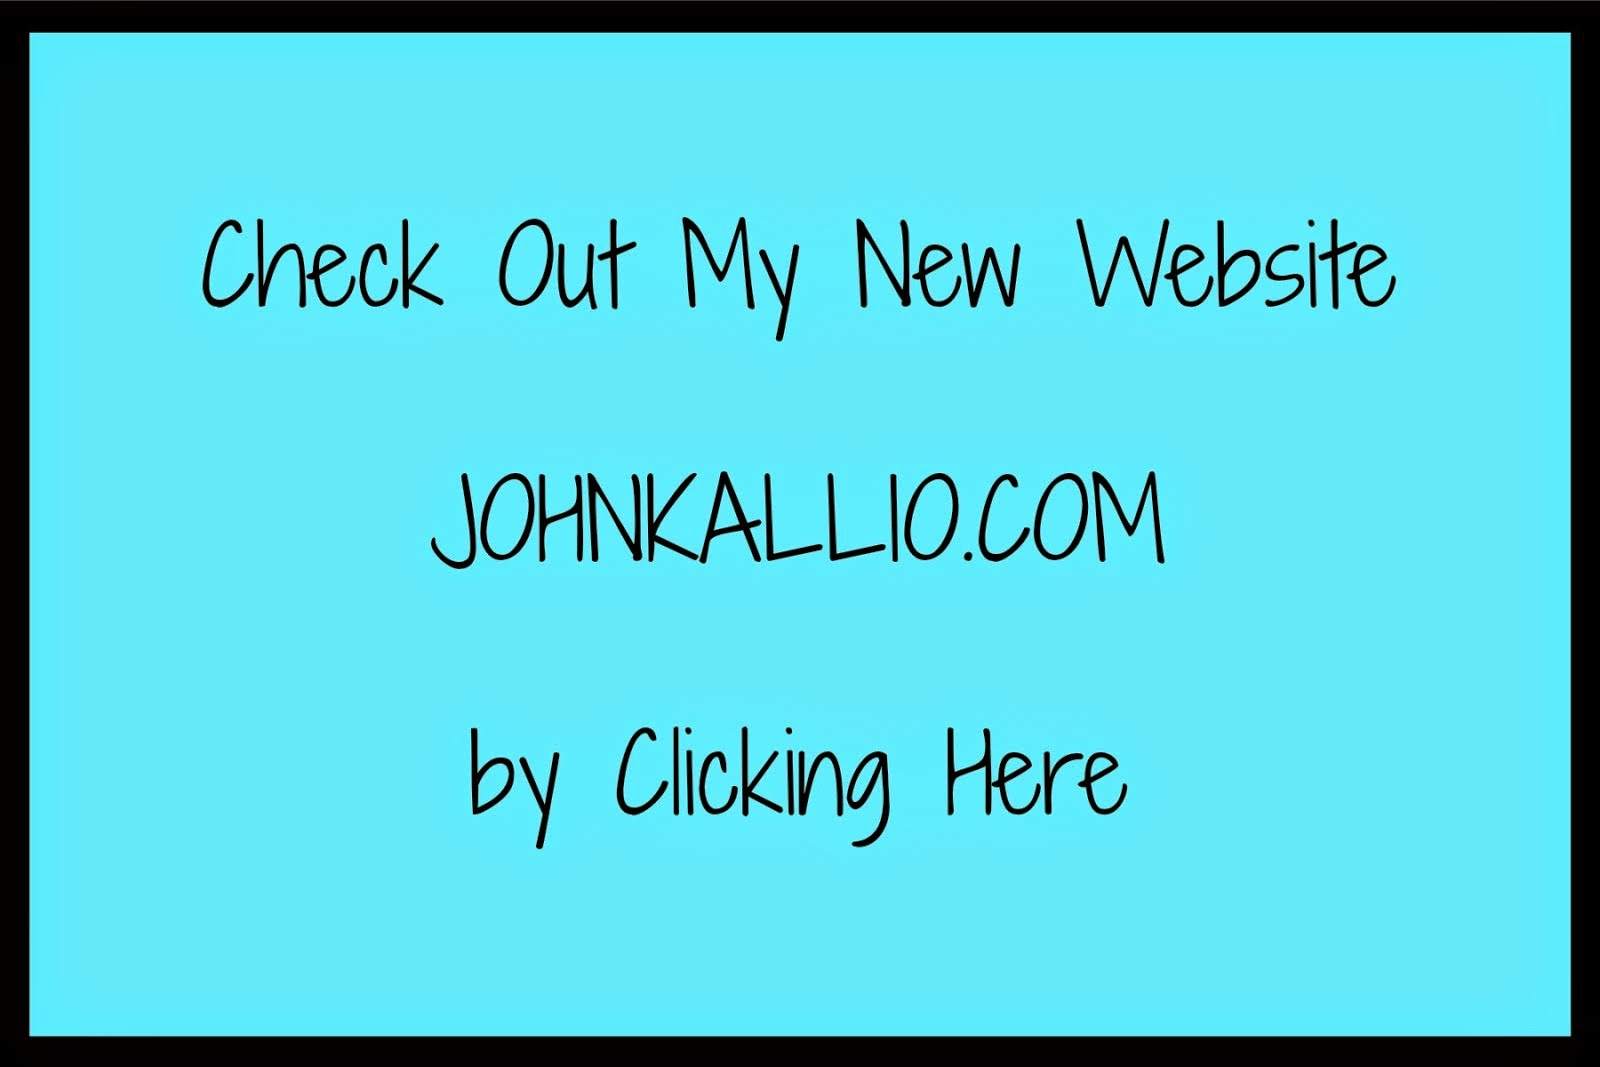 Check out my New Website